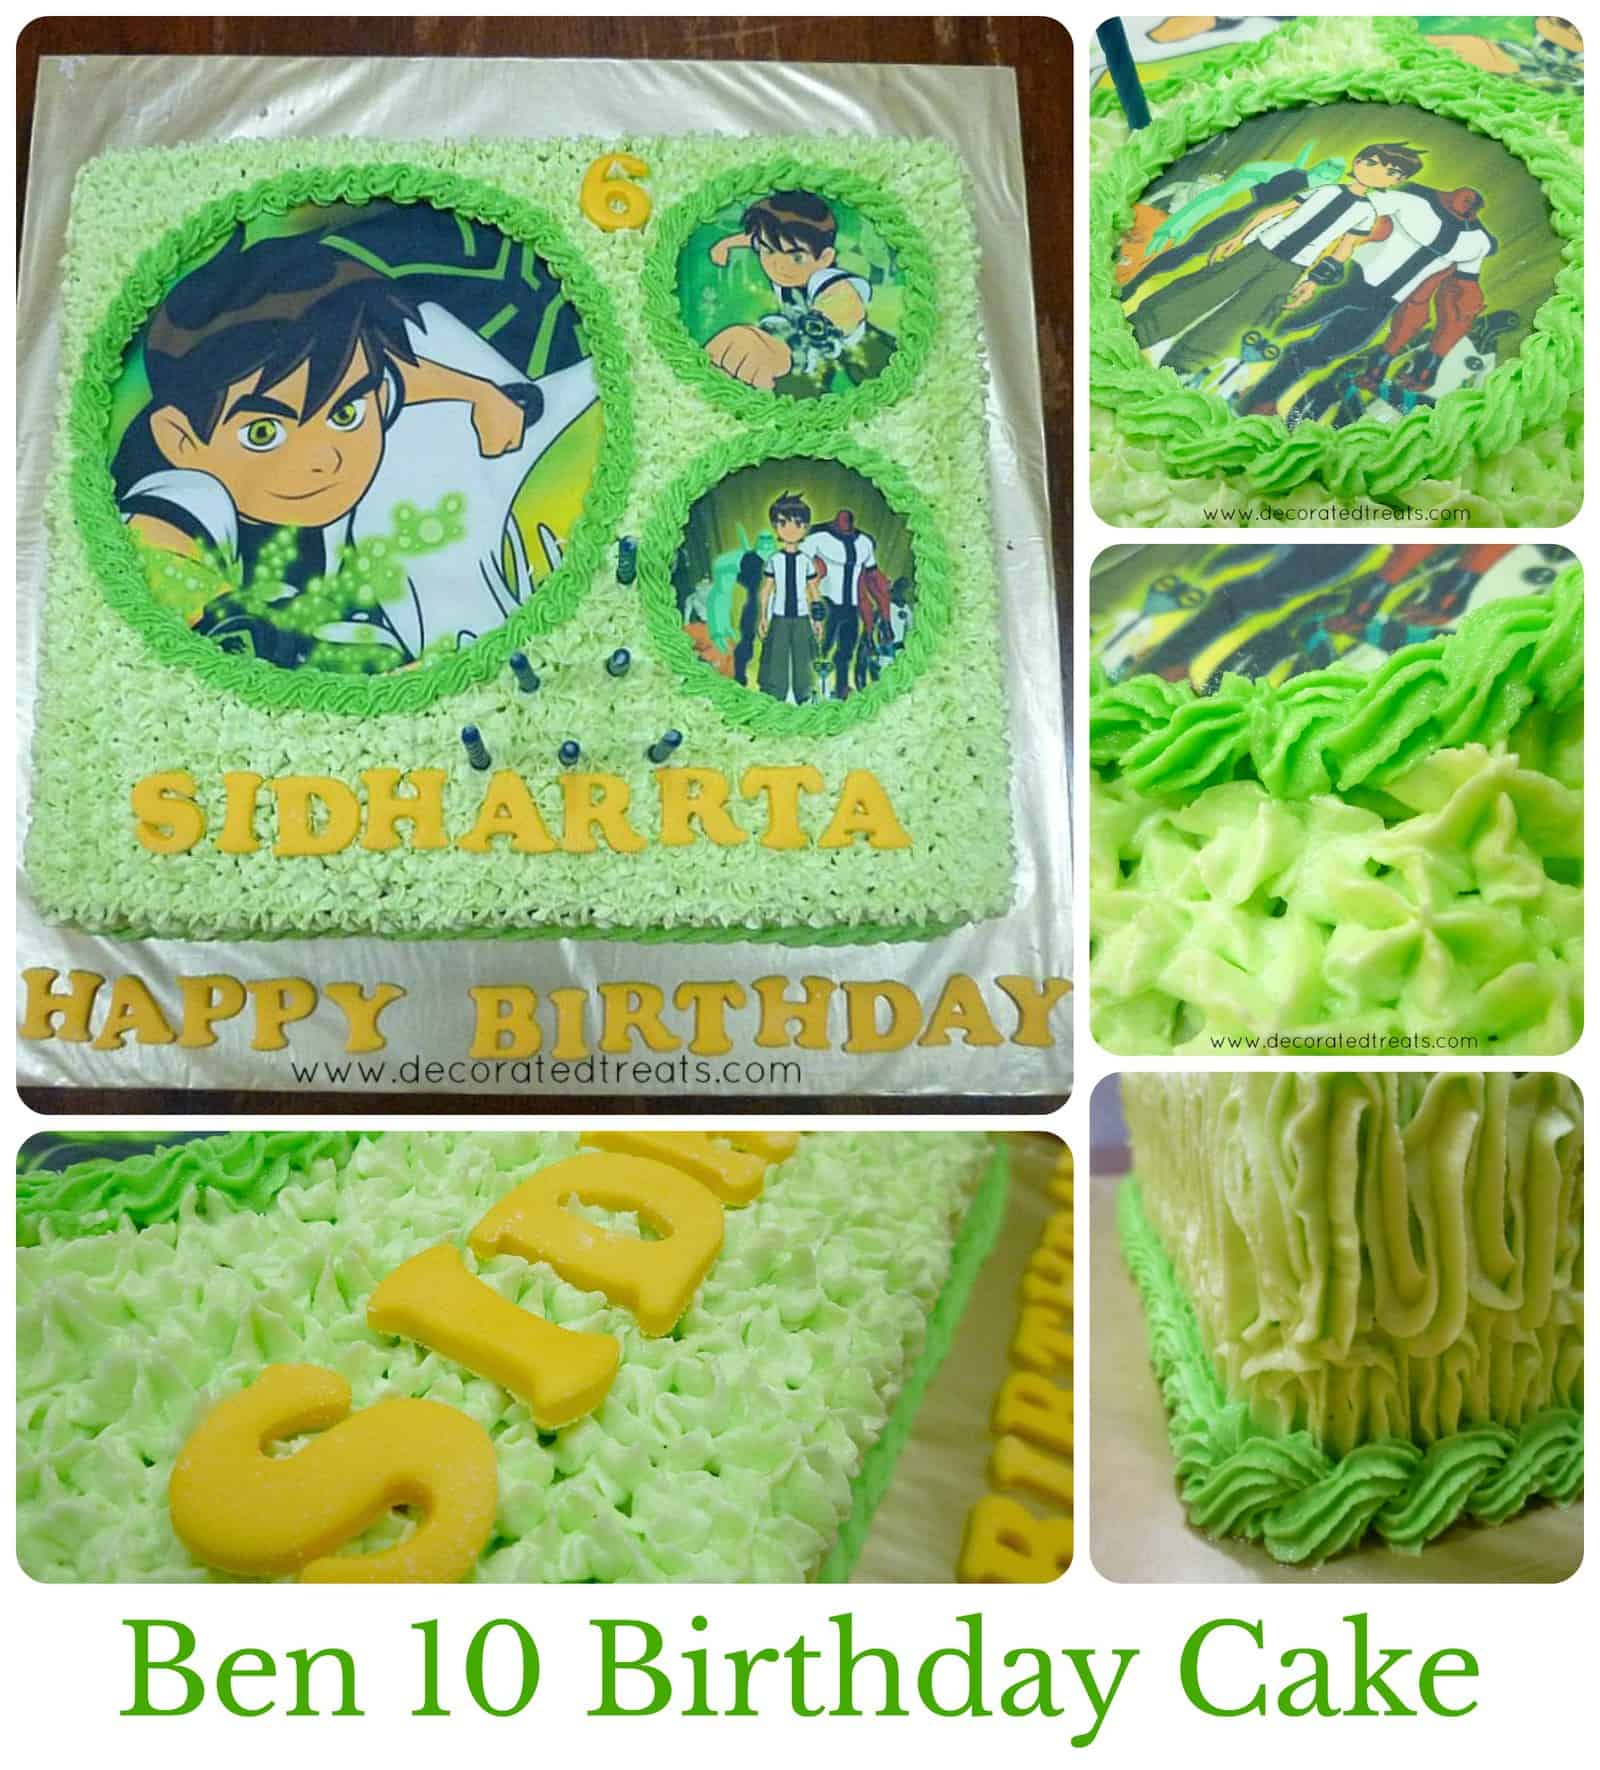 Ben 10 themed square birthday cake decorated in green buttercream and Ben 10 edible images